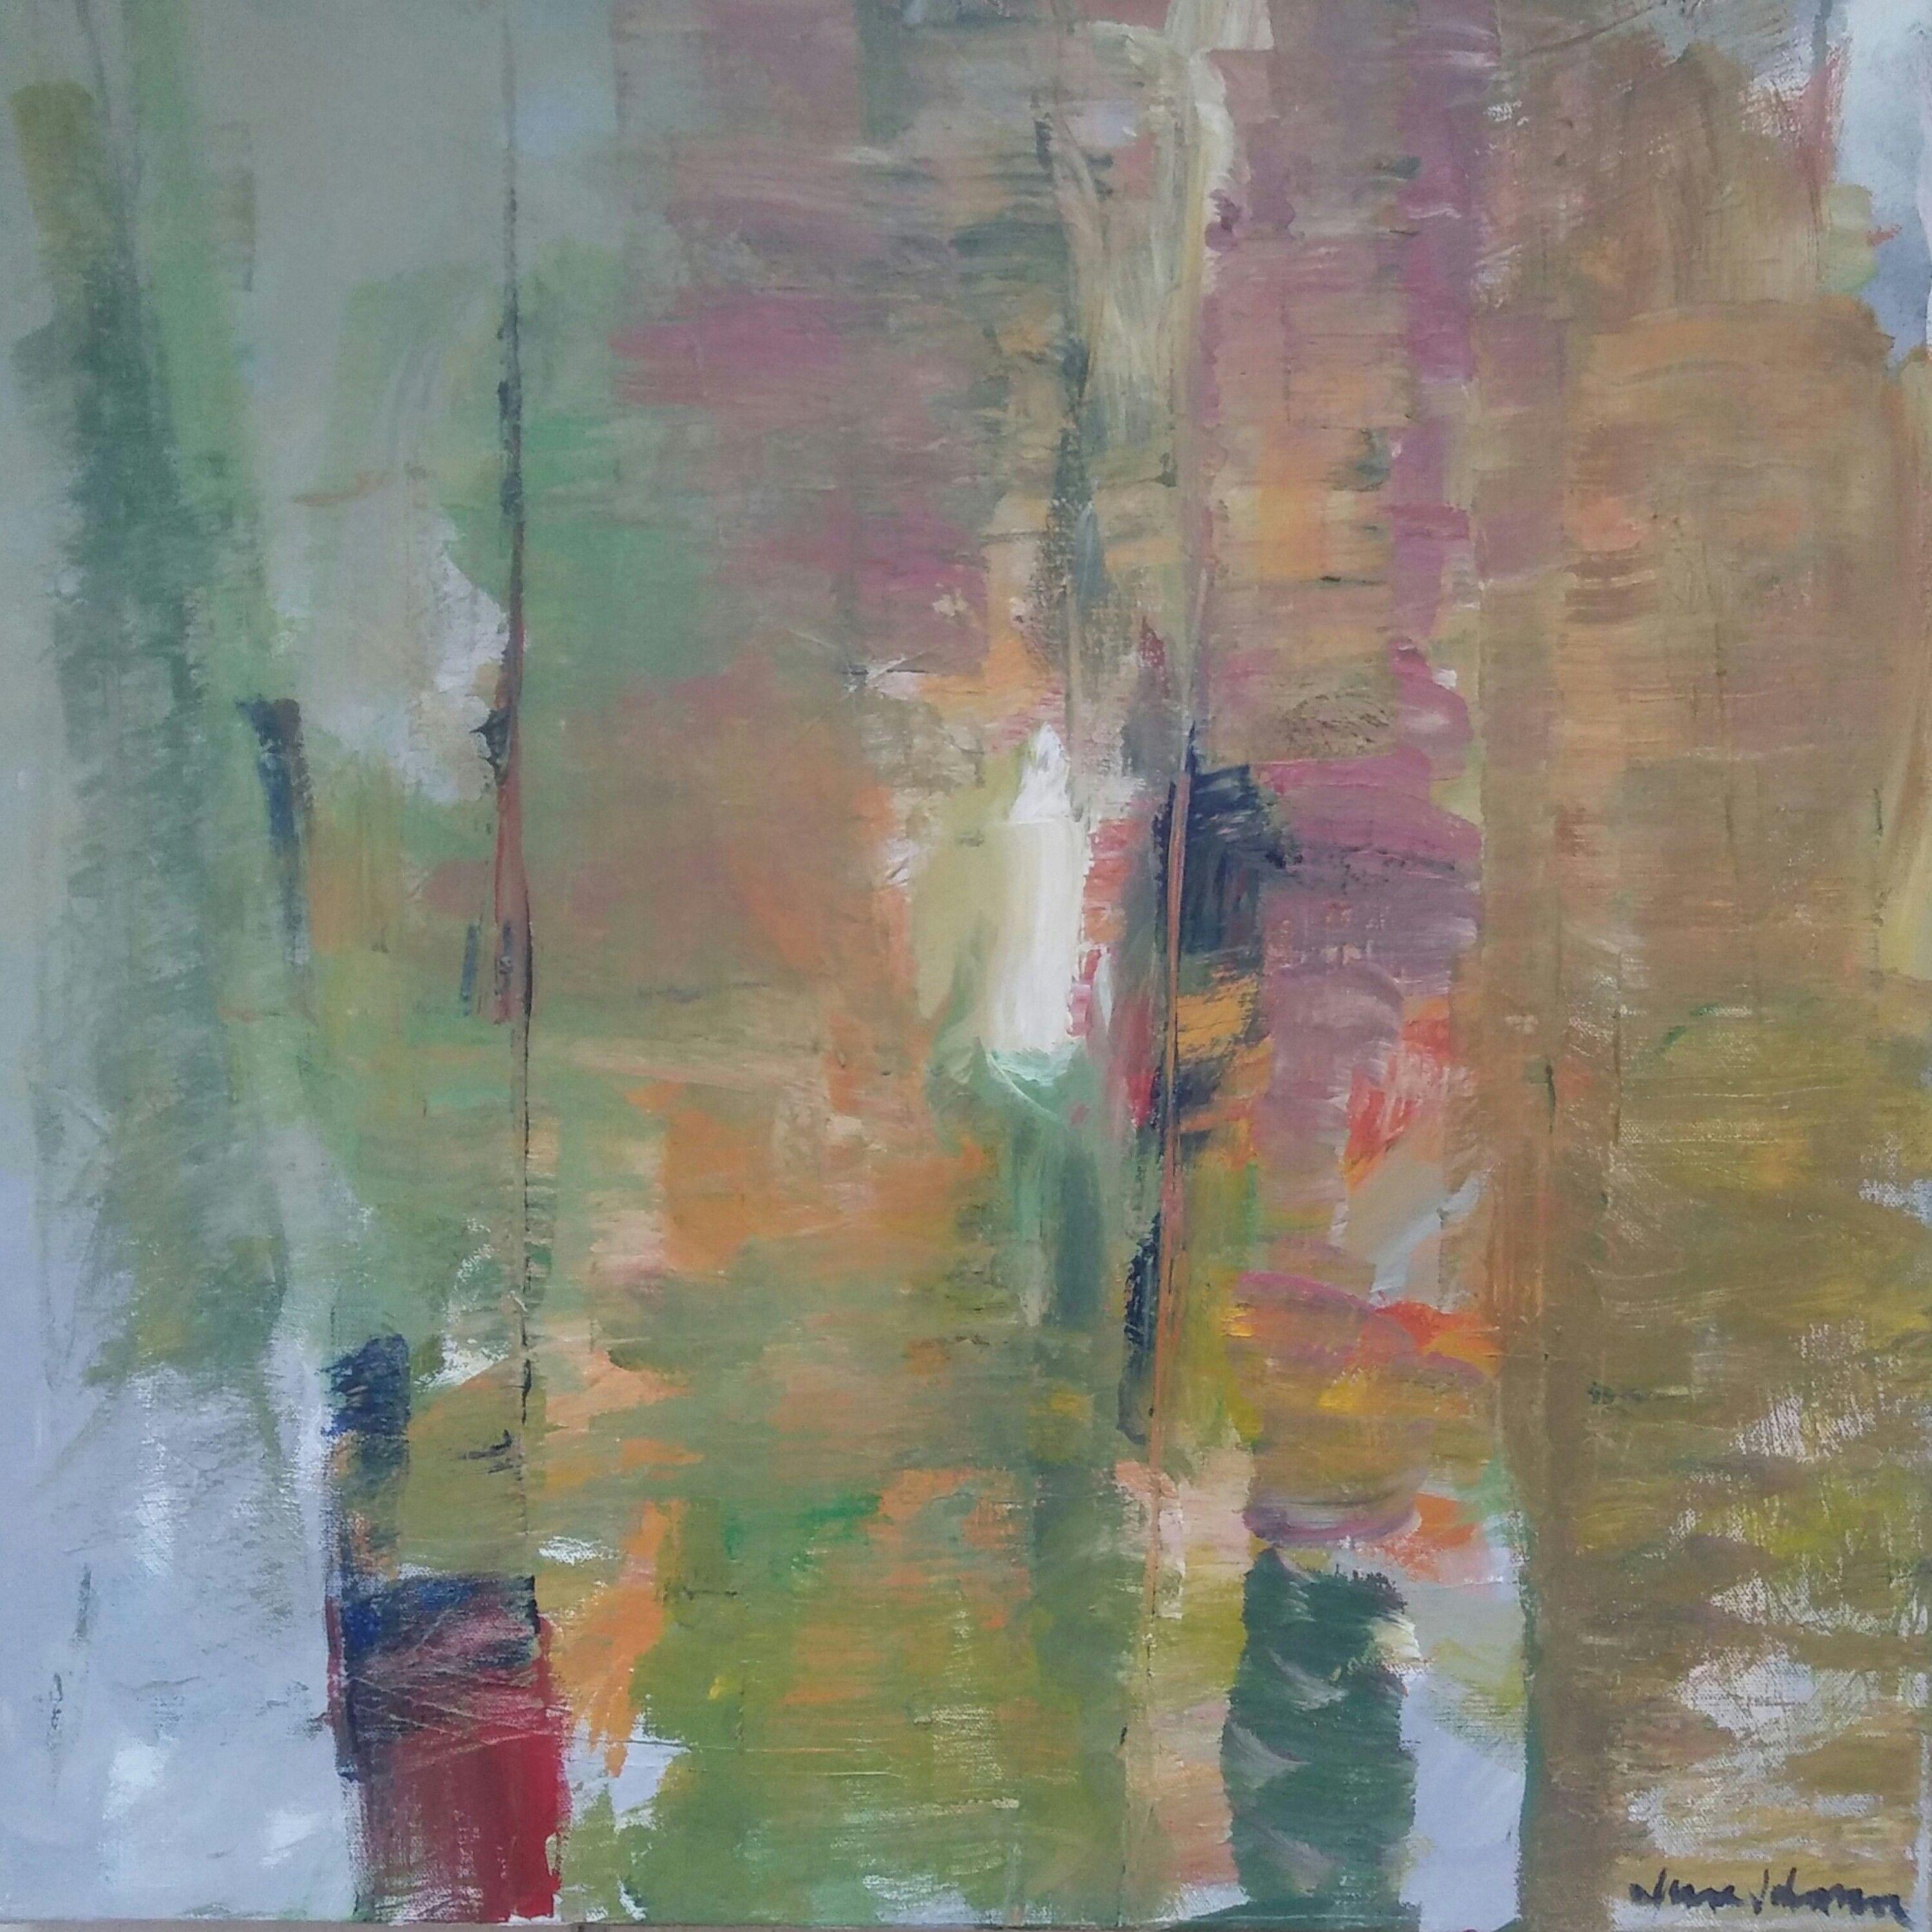 June Johnson Abstract Painting - "Tree Washing", Painting, Acrylic on Canvas